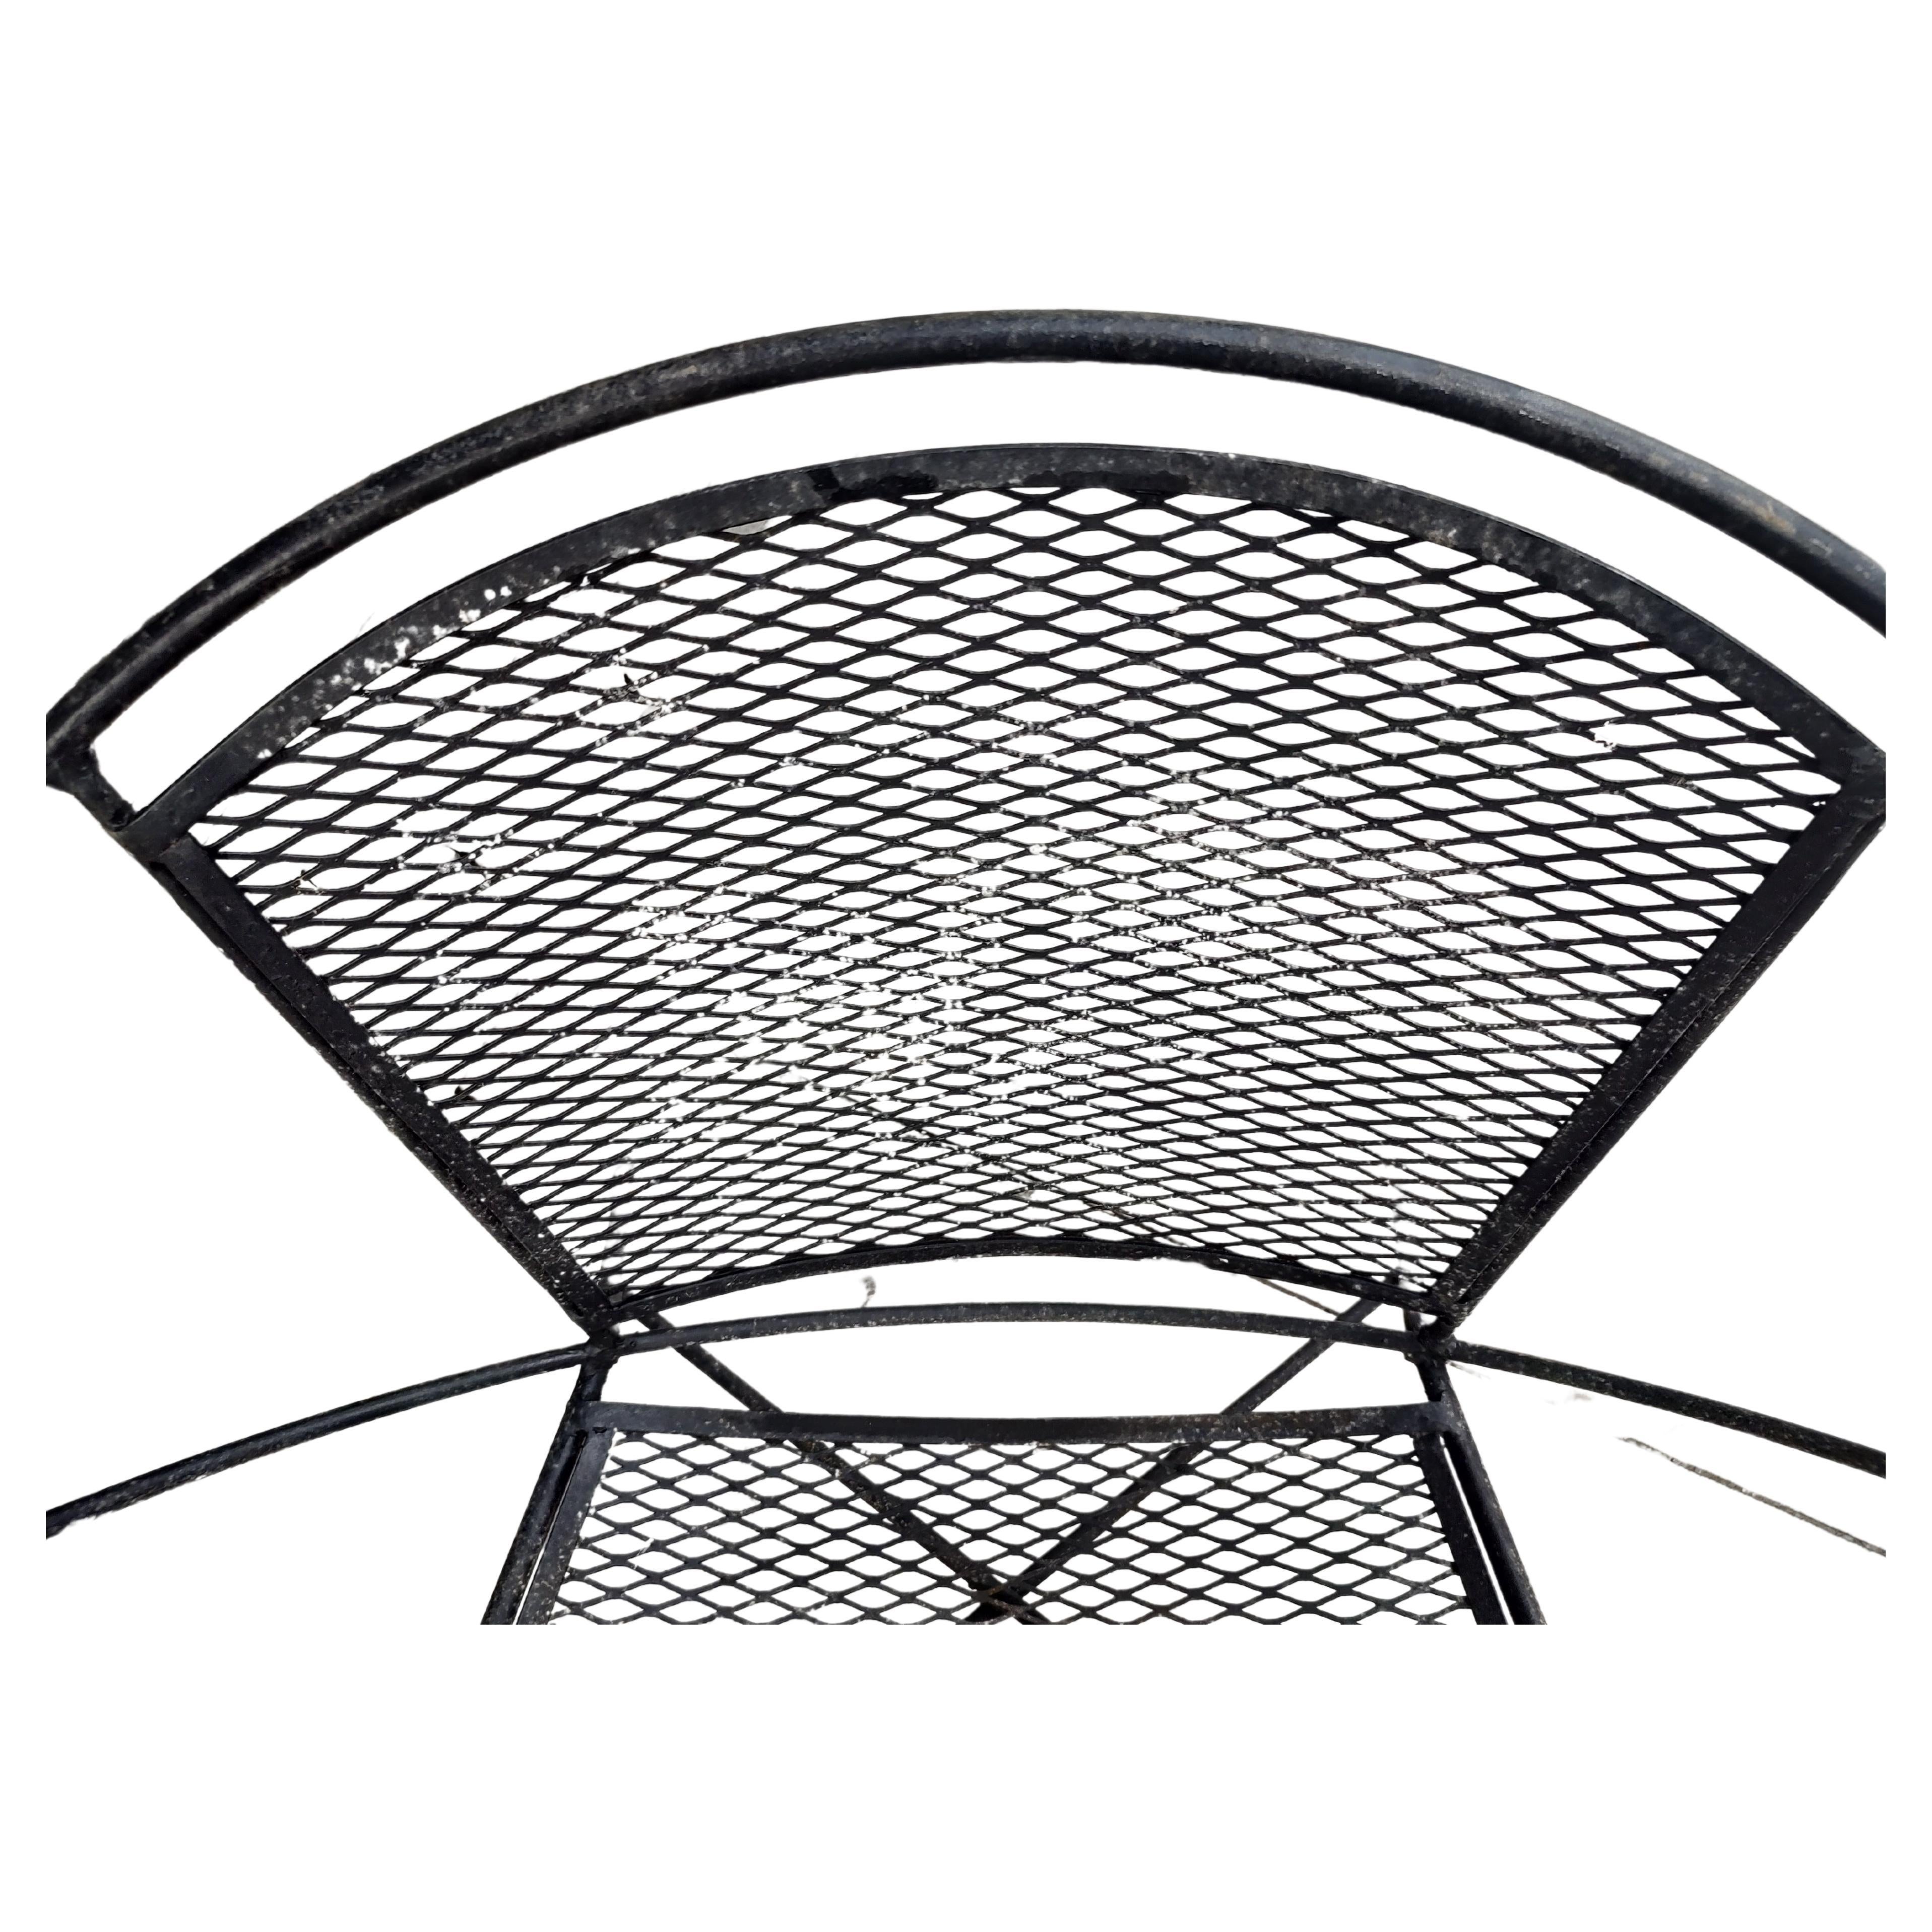 Mid-20th Century Mid-Century Modern Iron Hoop Lounge Chair by Maurizio Tempestini for Salterini  For Sale